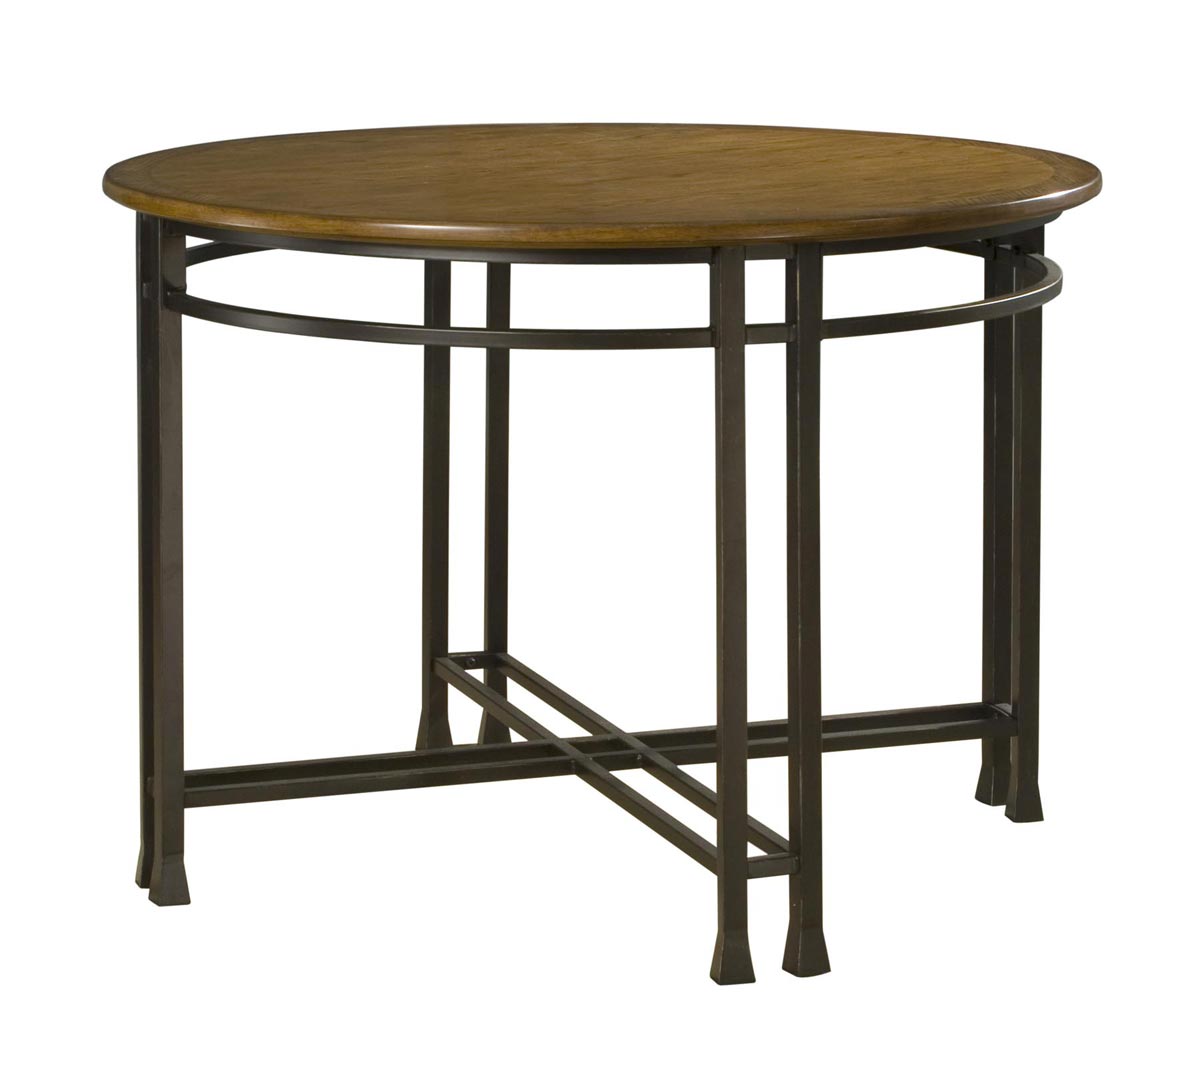 Home Styles Hill Dining Table - Distressed Oak